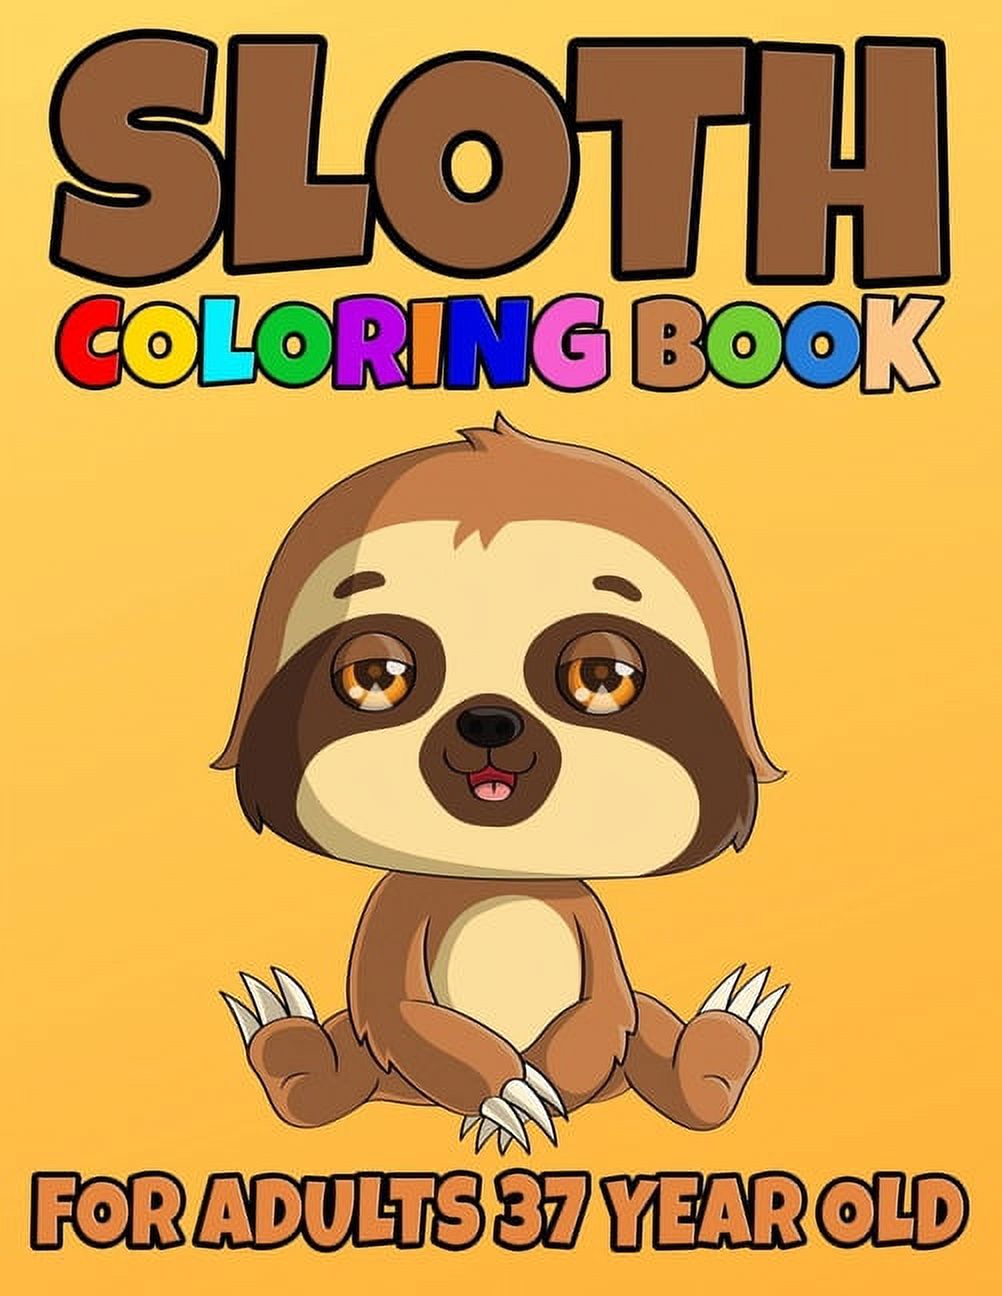 Sloth Coloring Book For Adults 37 Year Old : Sloth Coloring Book Cute Sloth Coloring Pages for Adorable Sloth Lover, Silly Sloth, Lazy Sloth, Stuffed Sloth, Sloth Relax, Sloth Hanging Tree. - Adults Relaxation with Stress Relieving Amazing Sloths Designs. (Paperback) - image 1 of 1